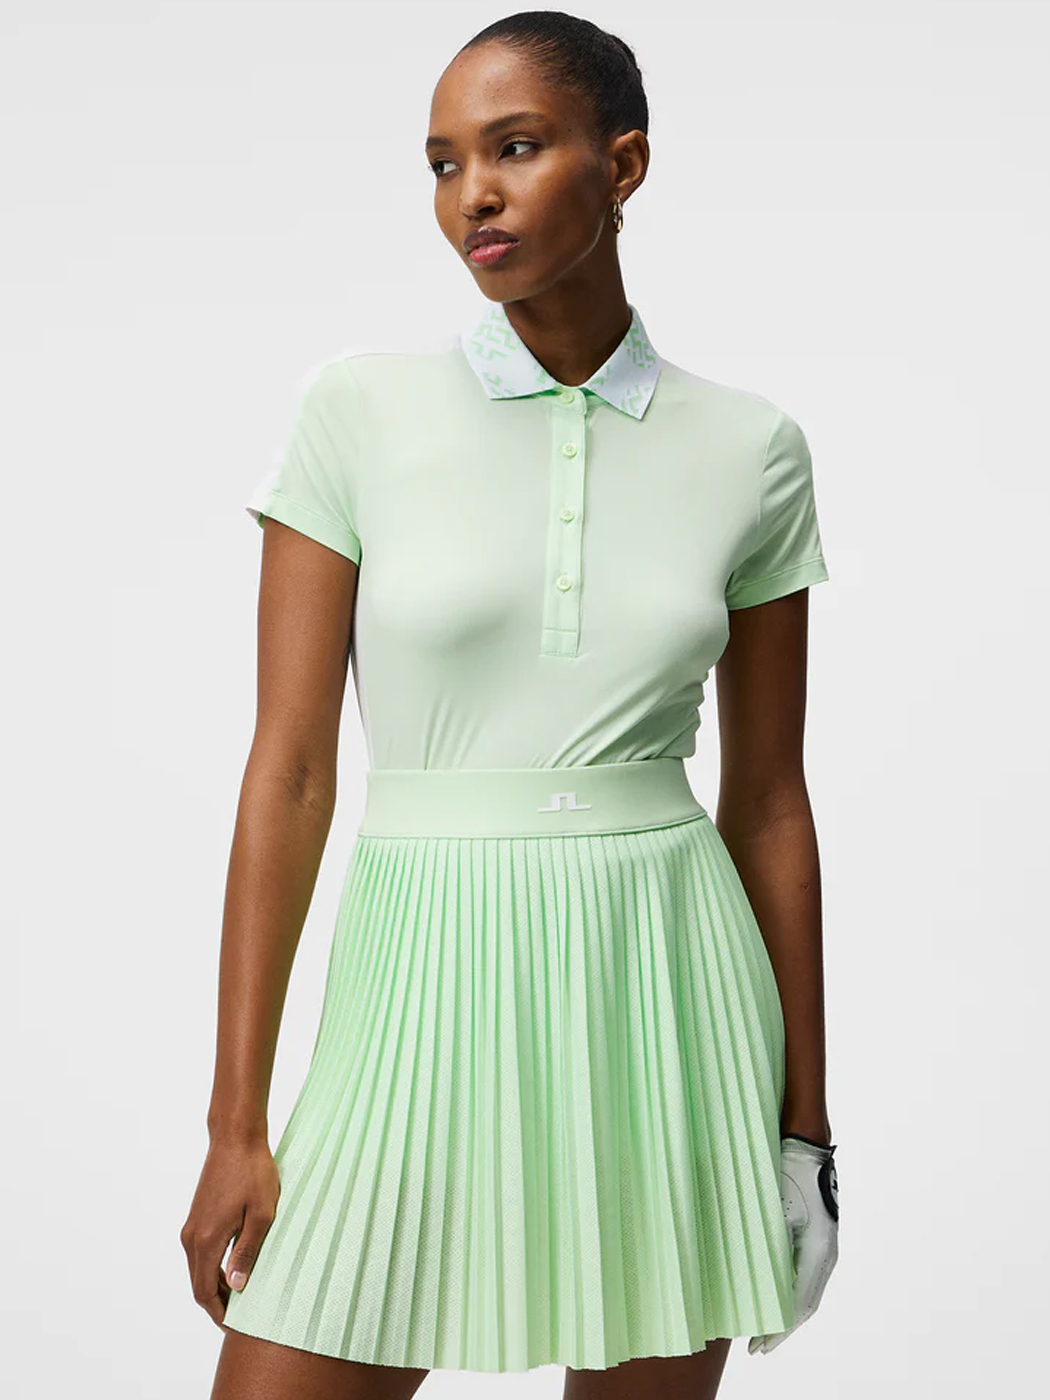 Jaylindberg Women&#039;s Golf Tilly Polo Party or Green